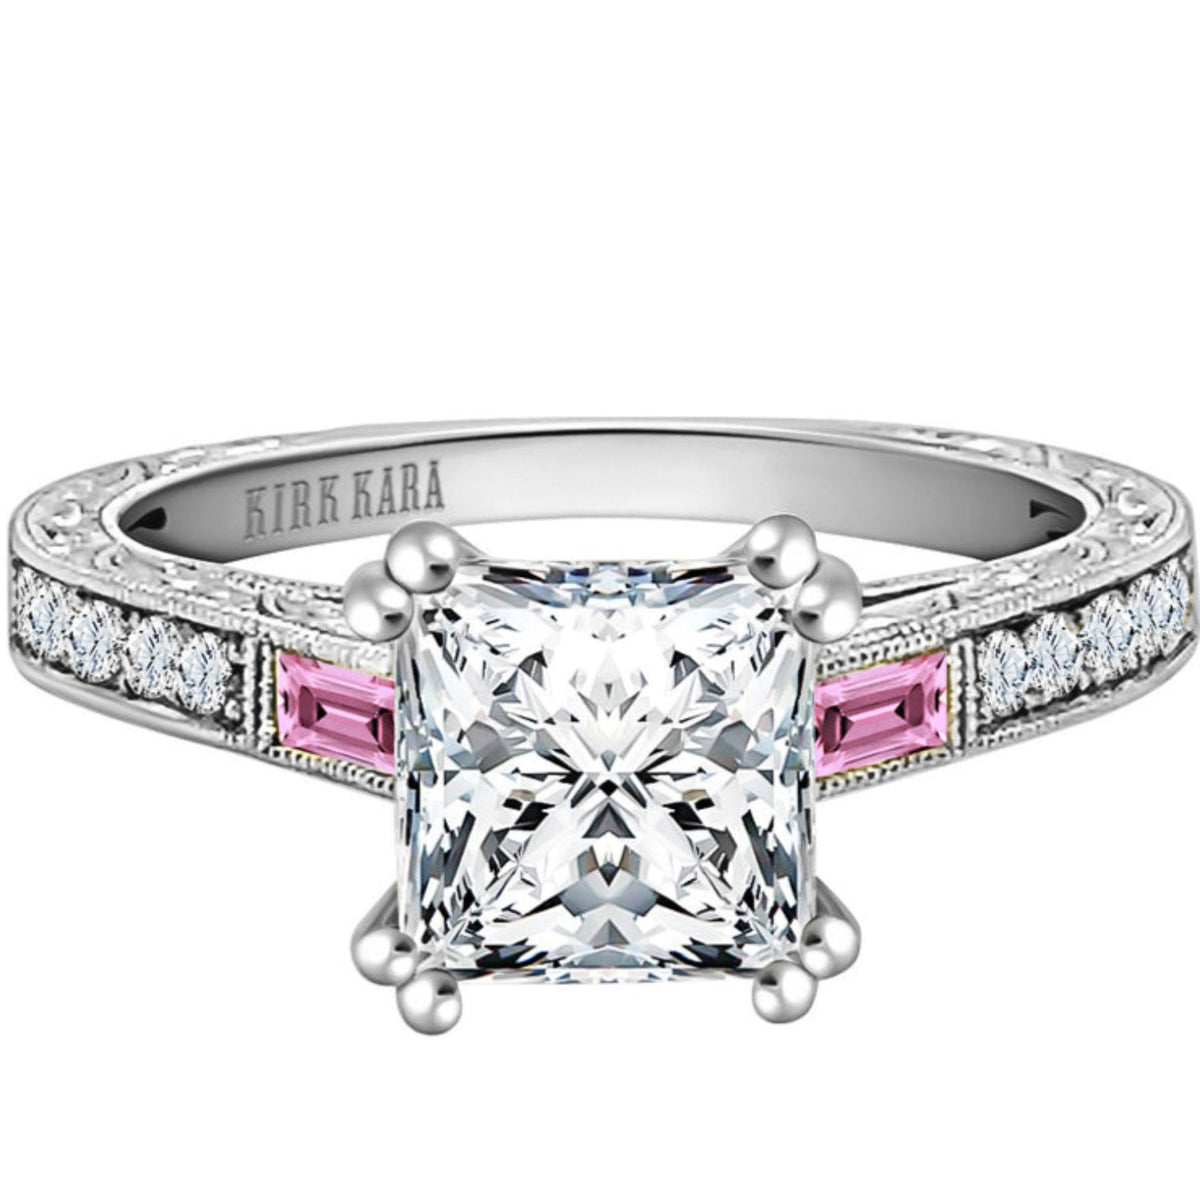 Pear Shaped Two Row Channel Moissanite Ring With Pink Sapphire In 18K  Yellow Gold